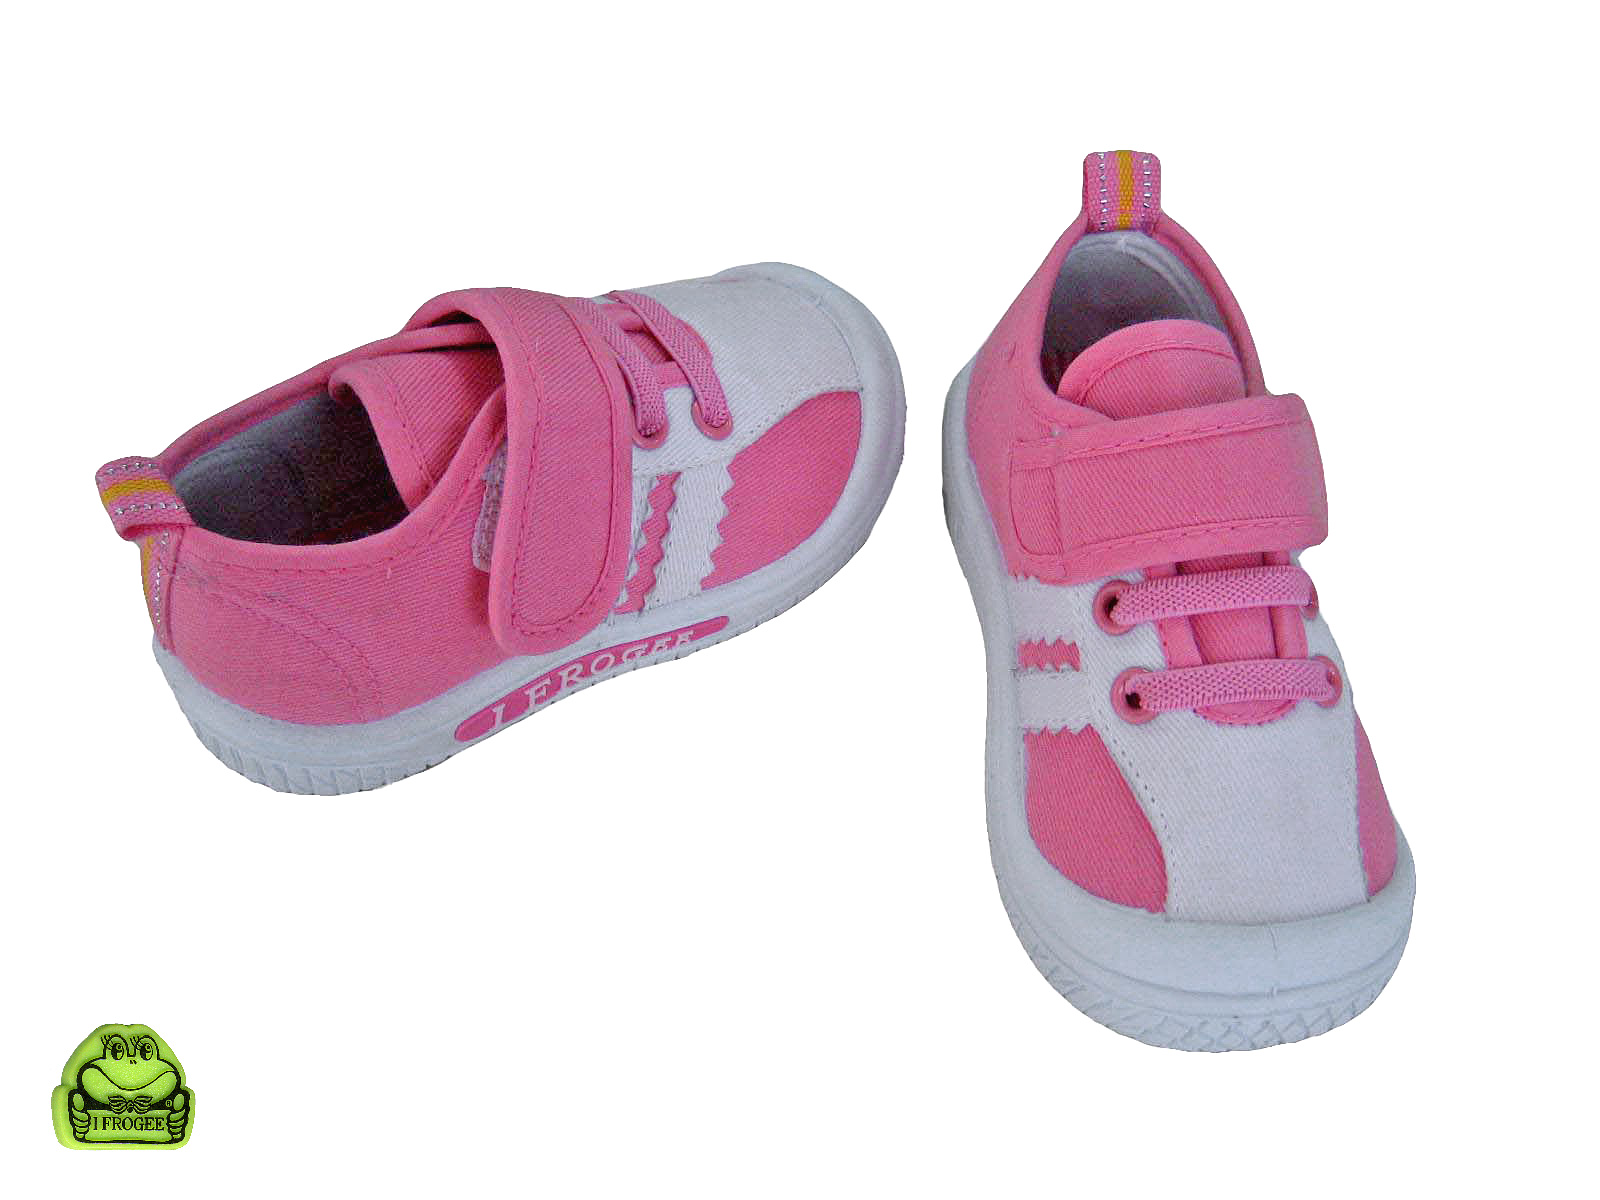 Unique squeaker shoes for babies & toddlers ifrogee